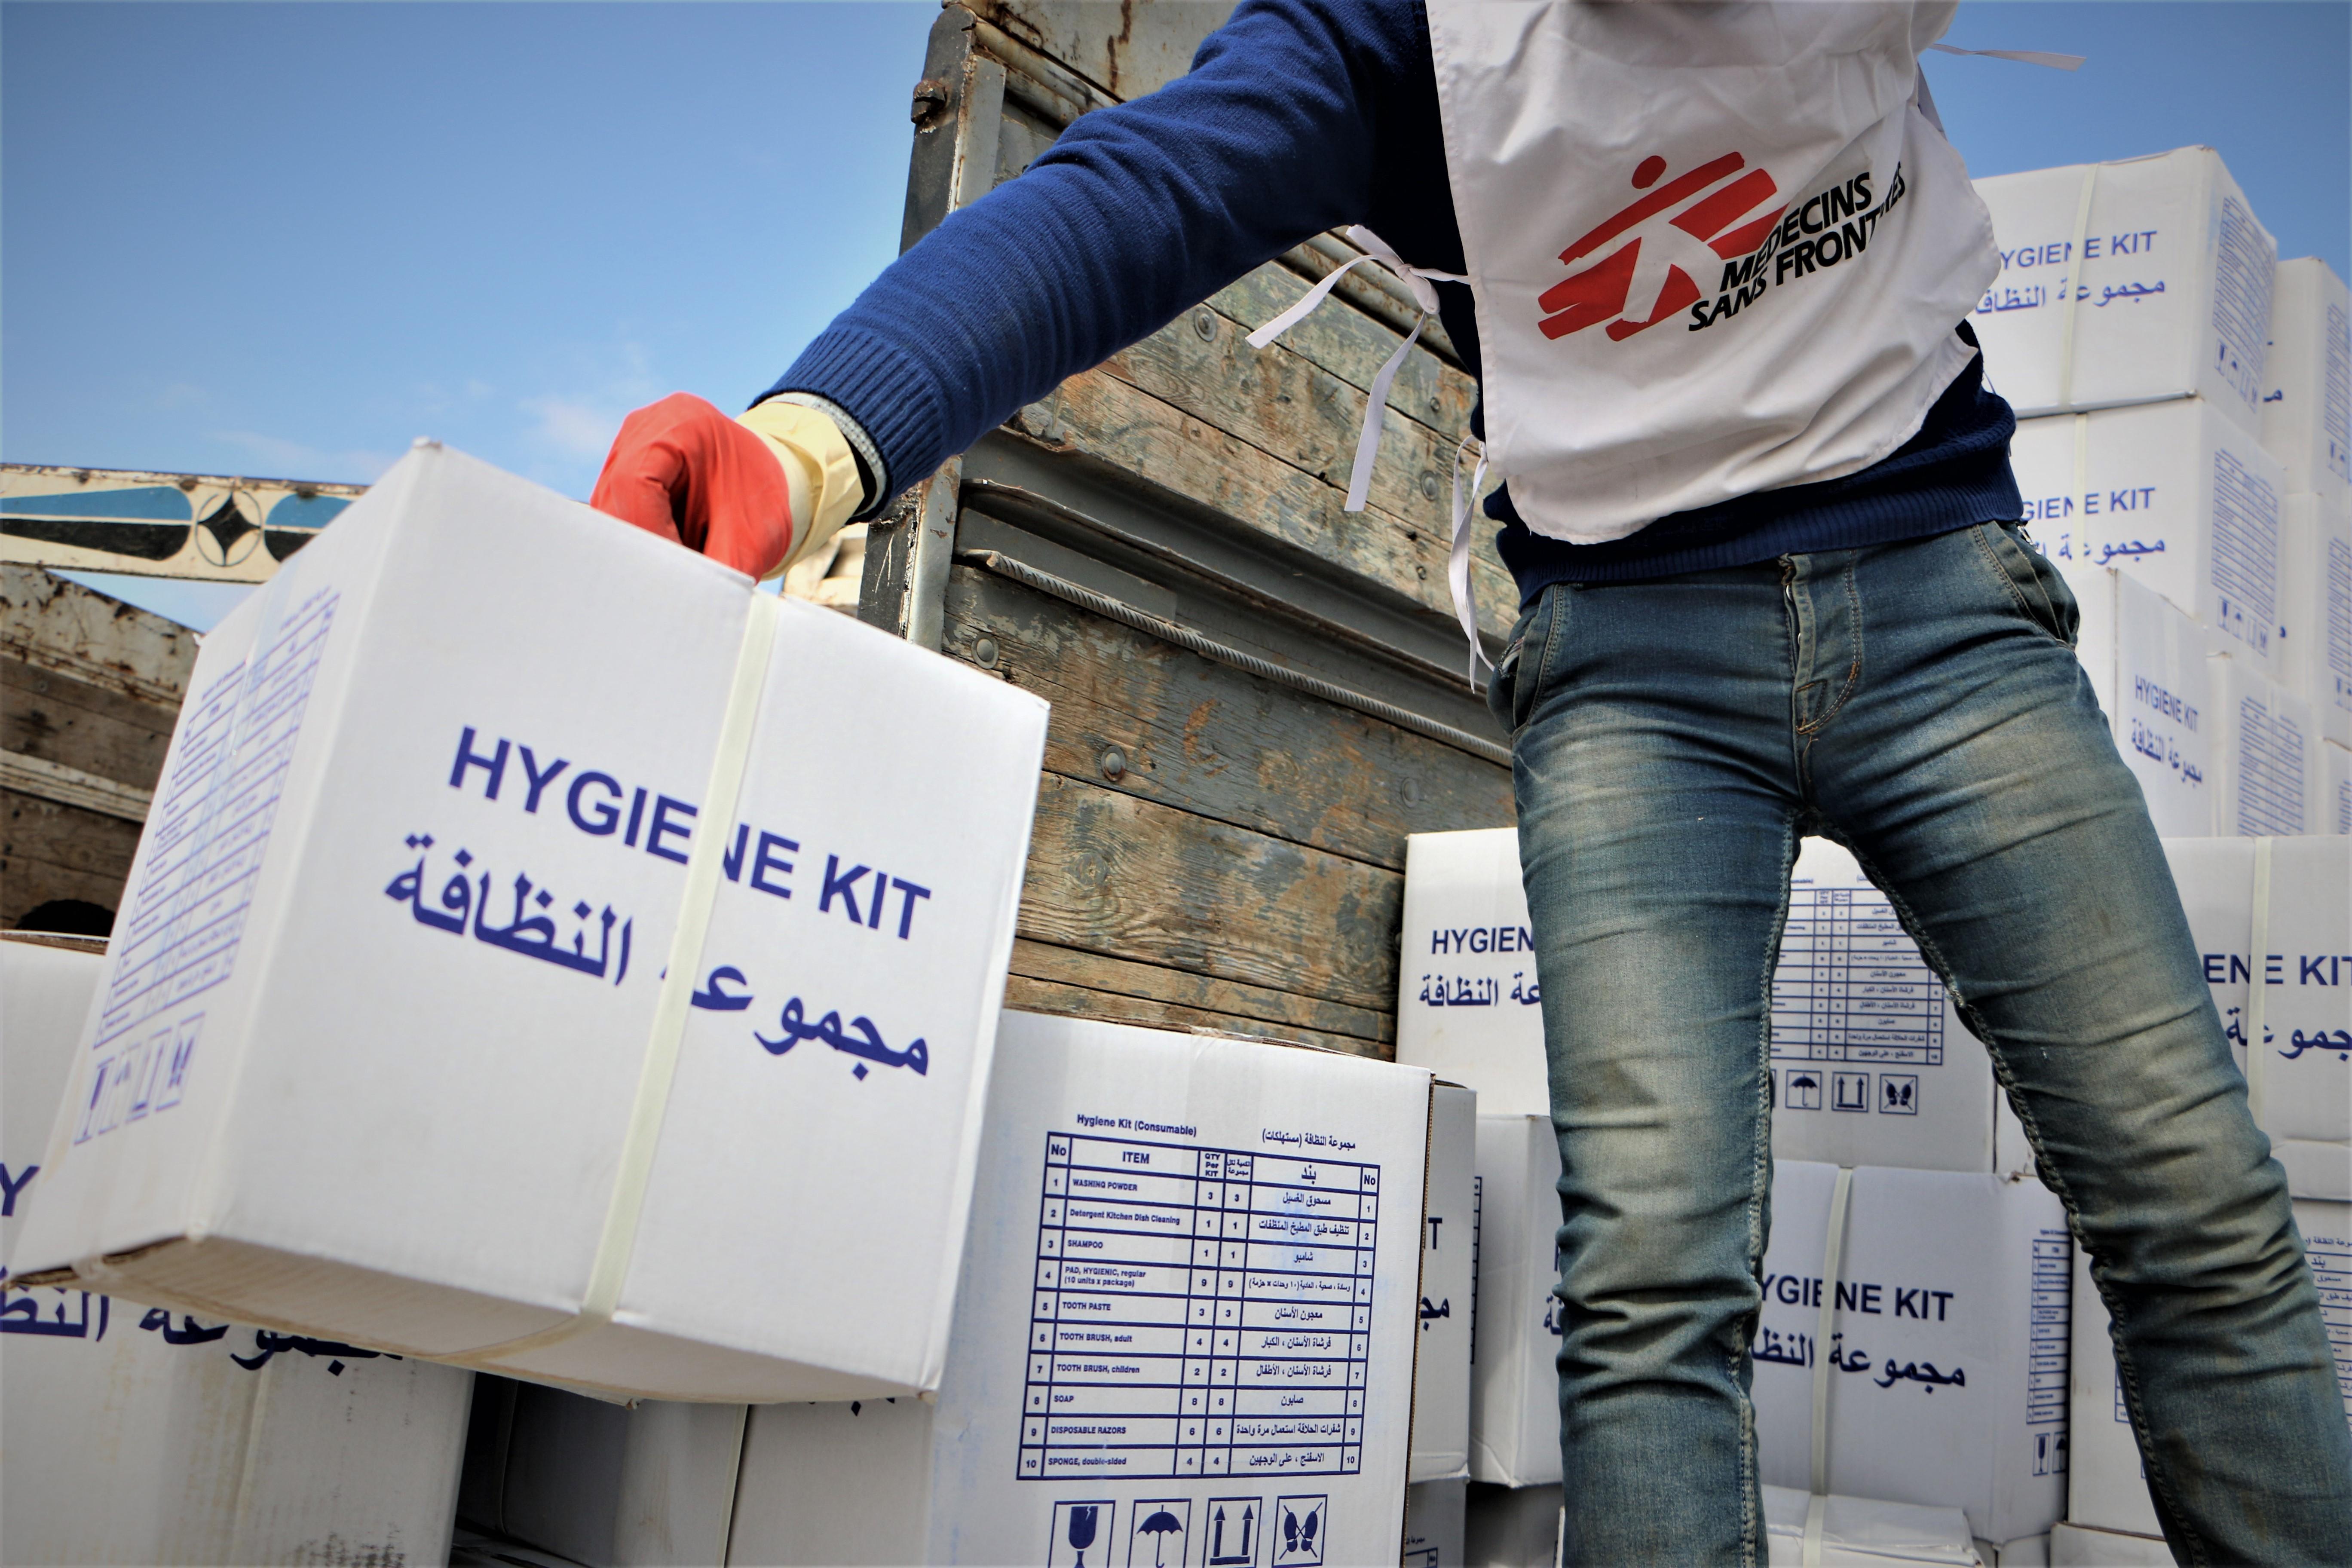 MSF distributing hygiene kits and NFIs in Abo Obaida area, Northwest Syria